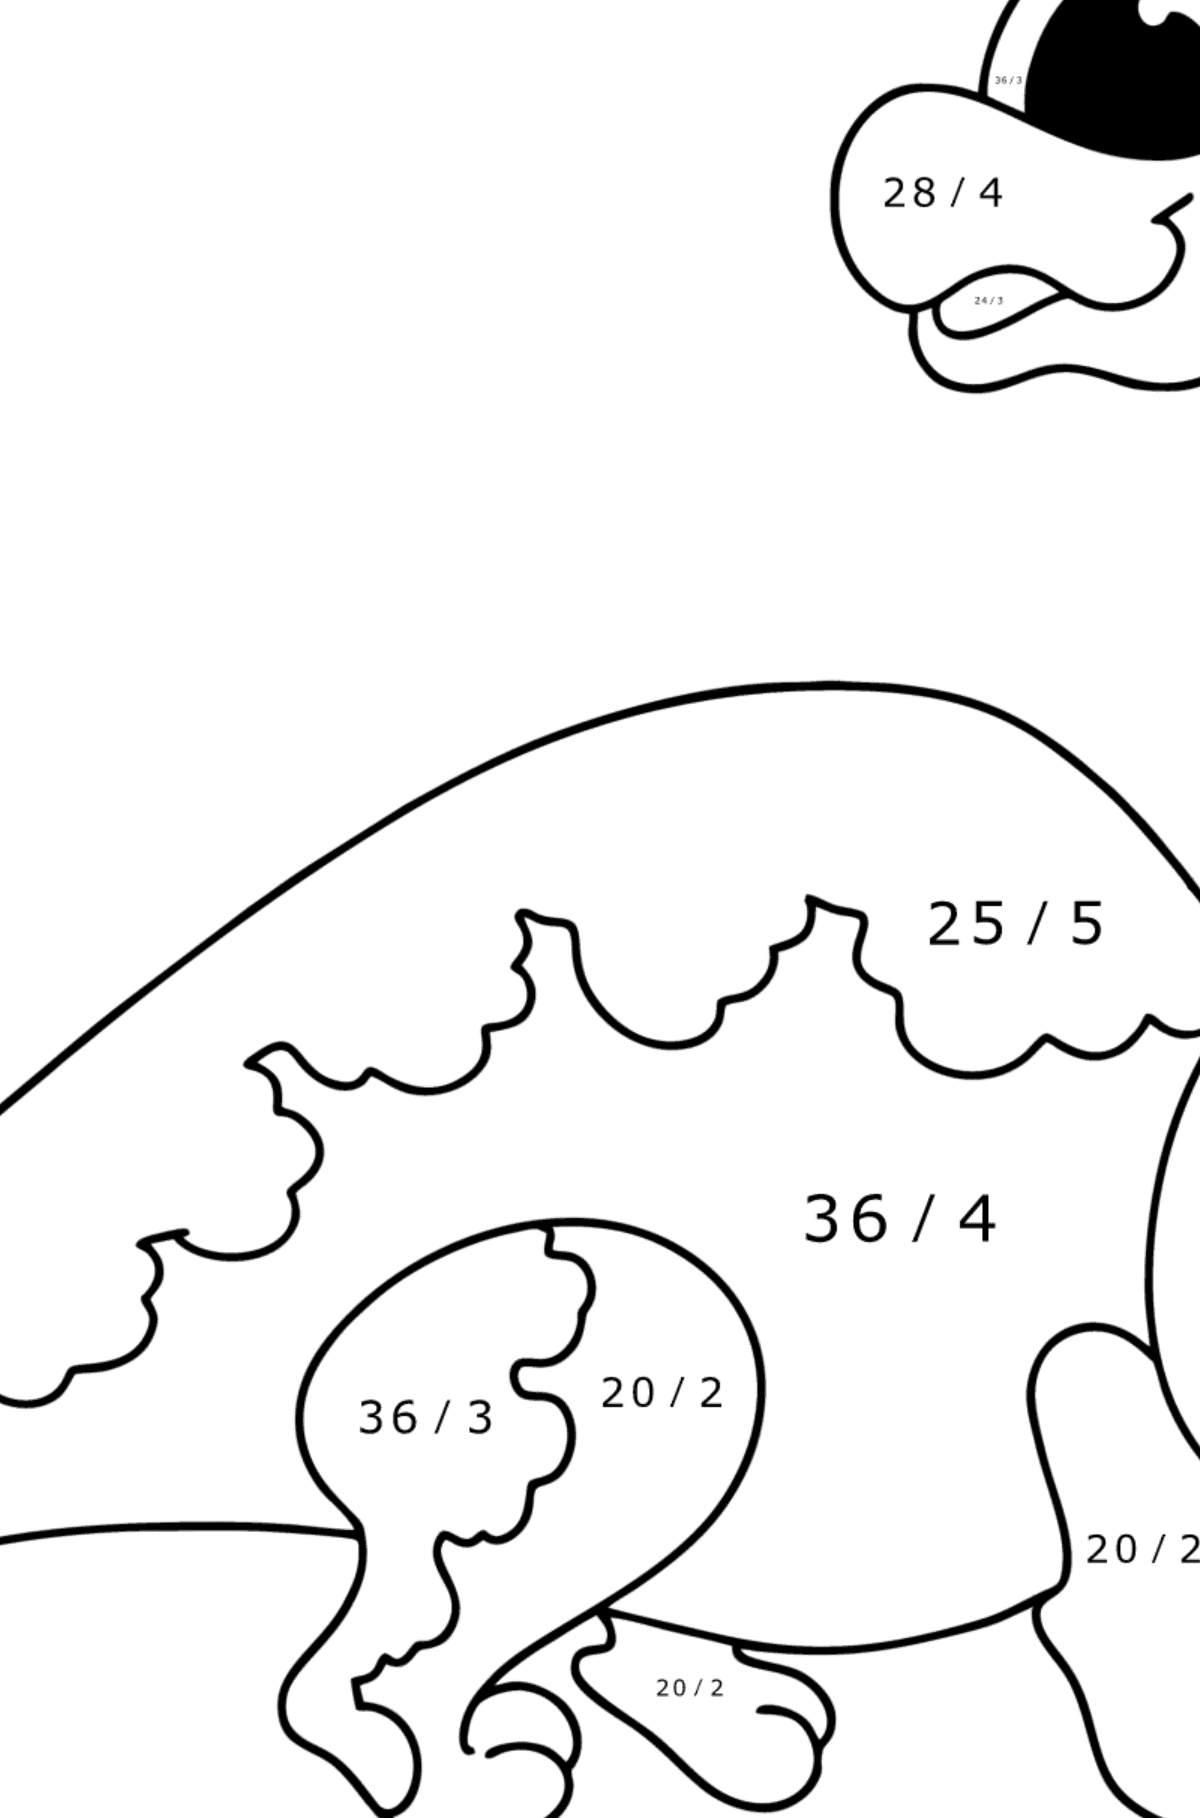 Brachiosaurus coloring page - Math Coloring - Division for Kids